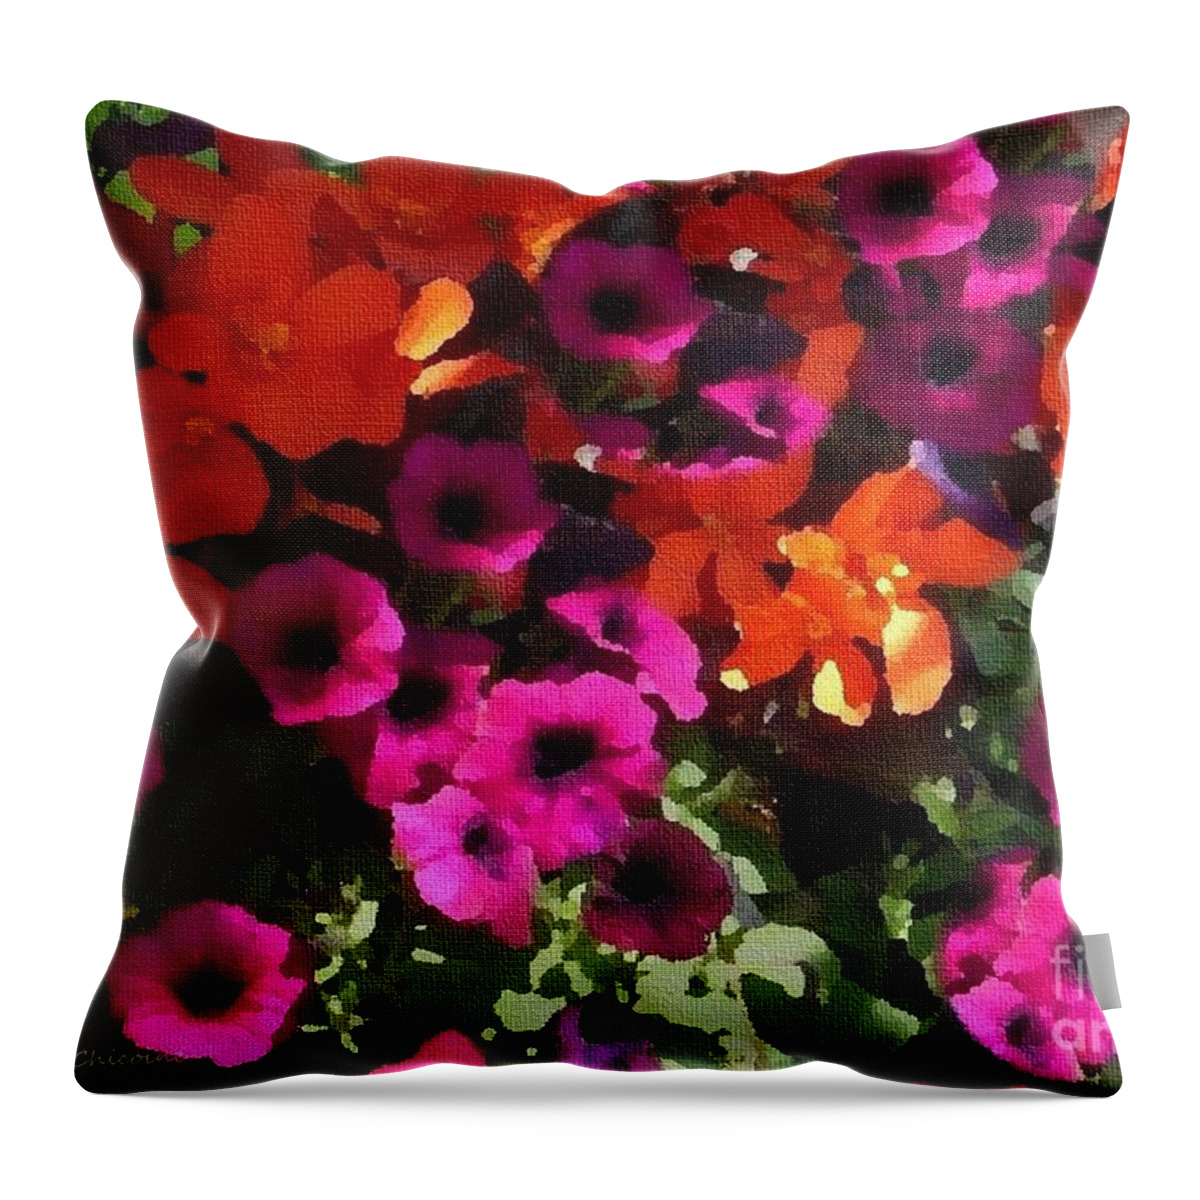 Photographic Art Throw Pillow featuring the digital art Summer Heat by Kathie Chicoine